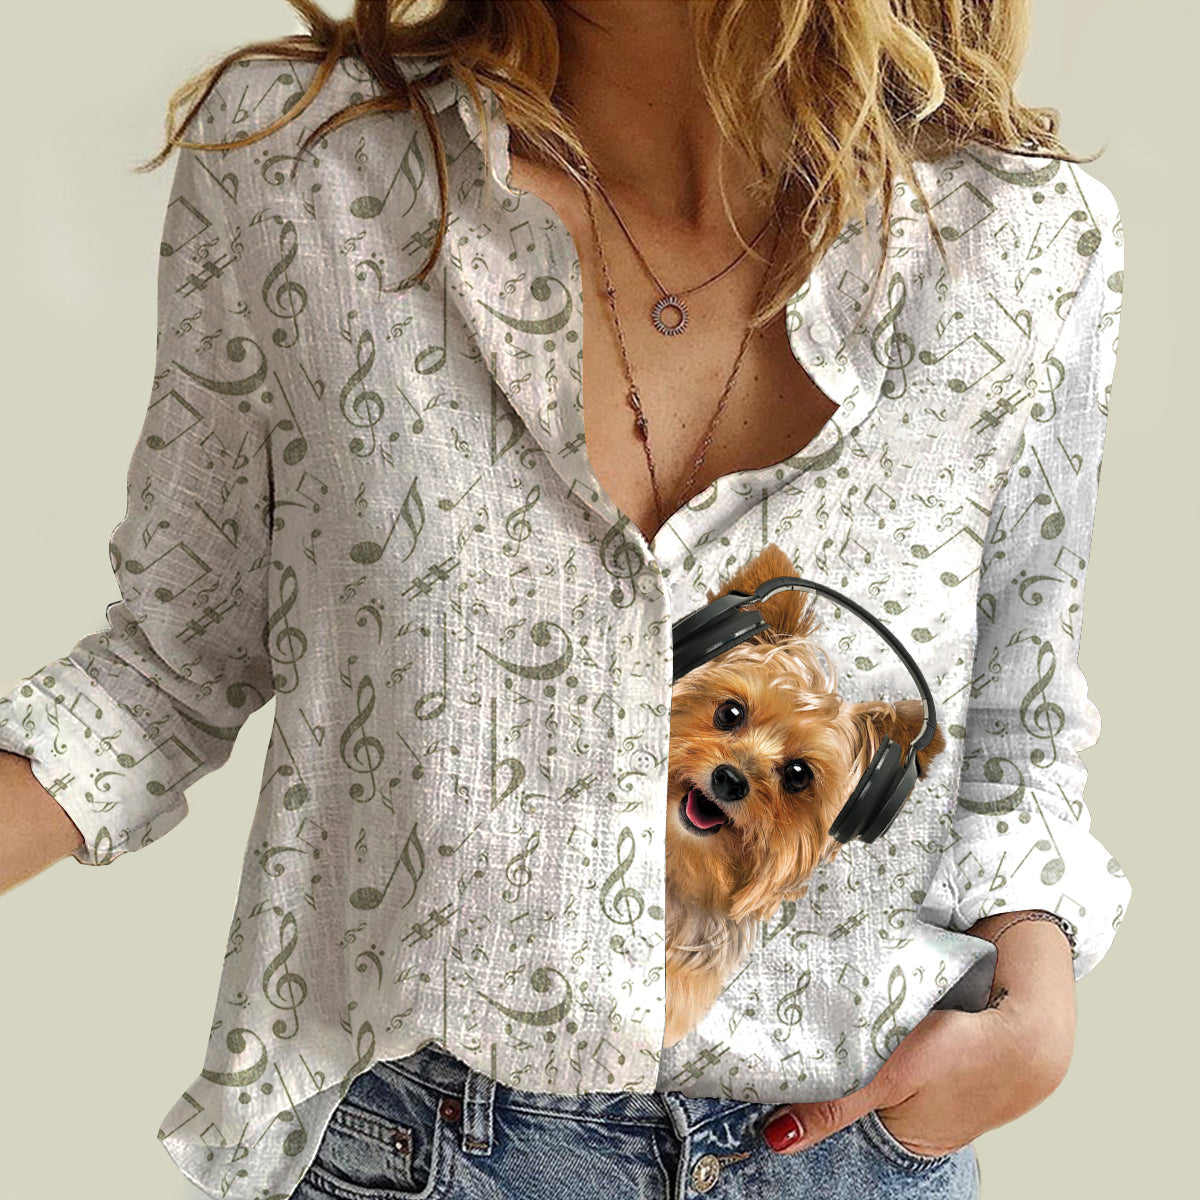 Great Music With Yorkshire Terrier 03 - Women's Long-Sleeve Shirt